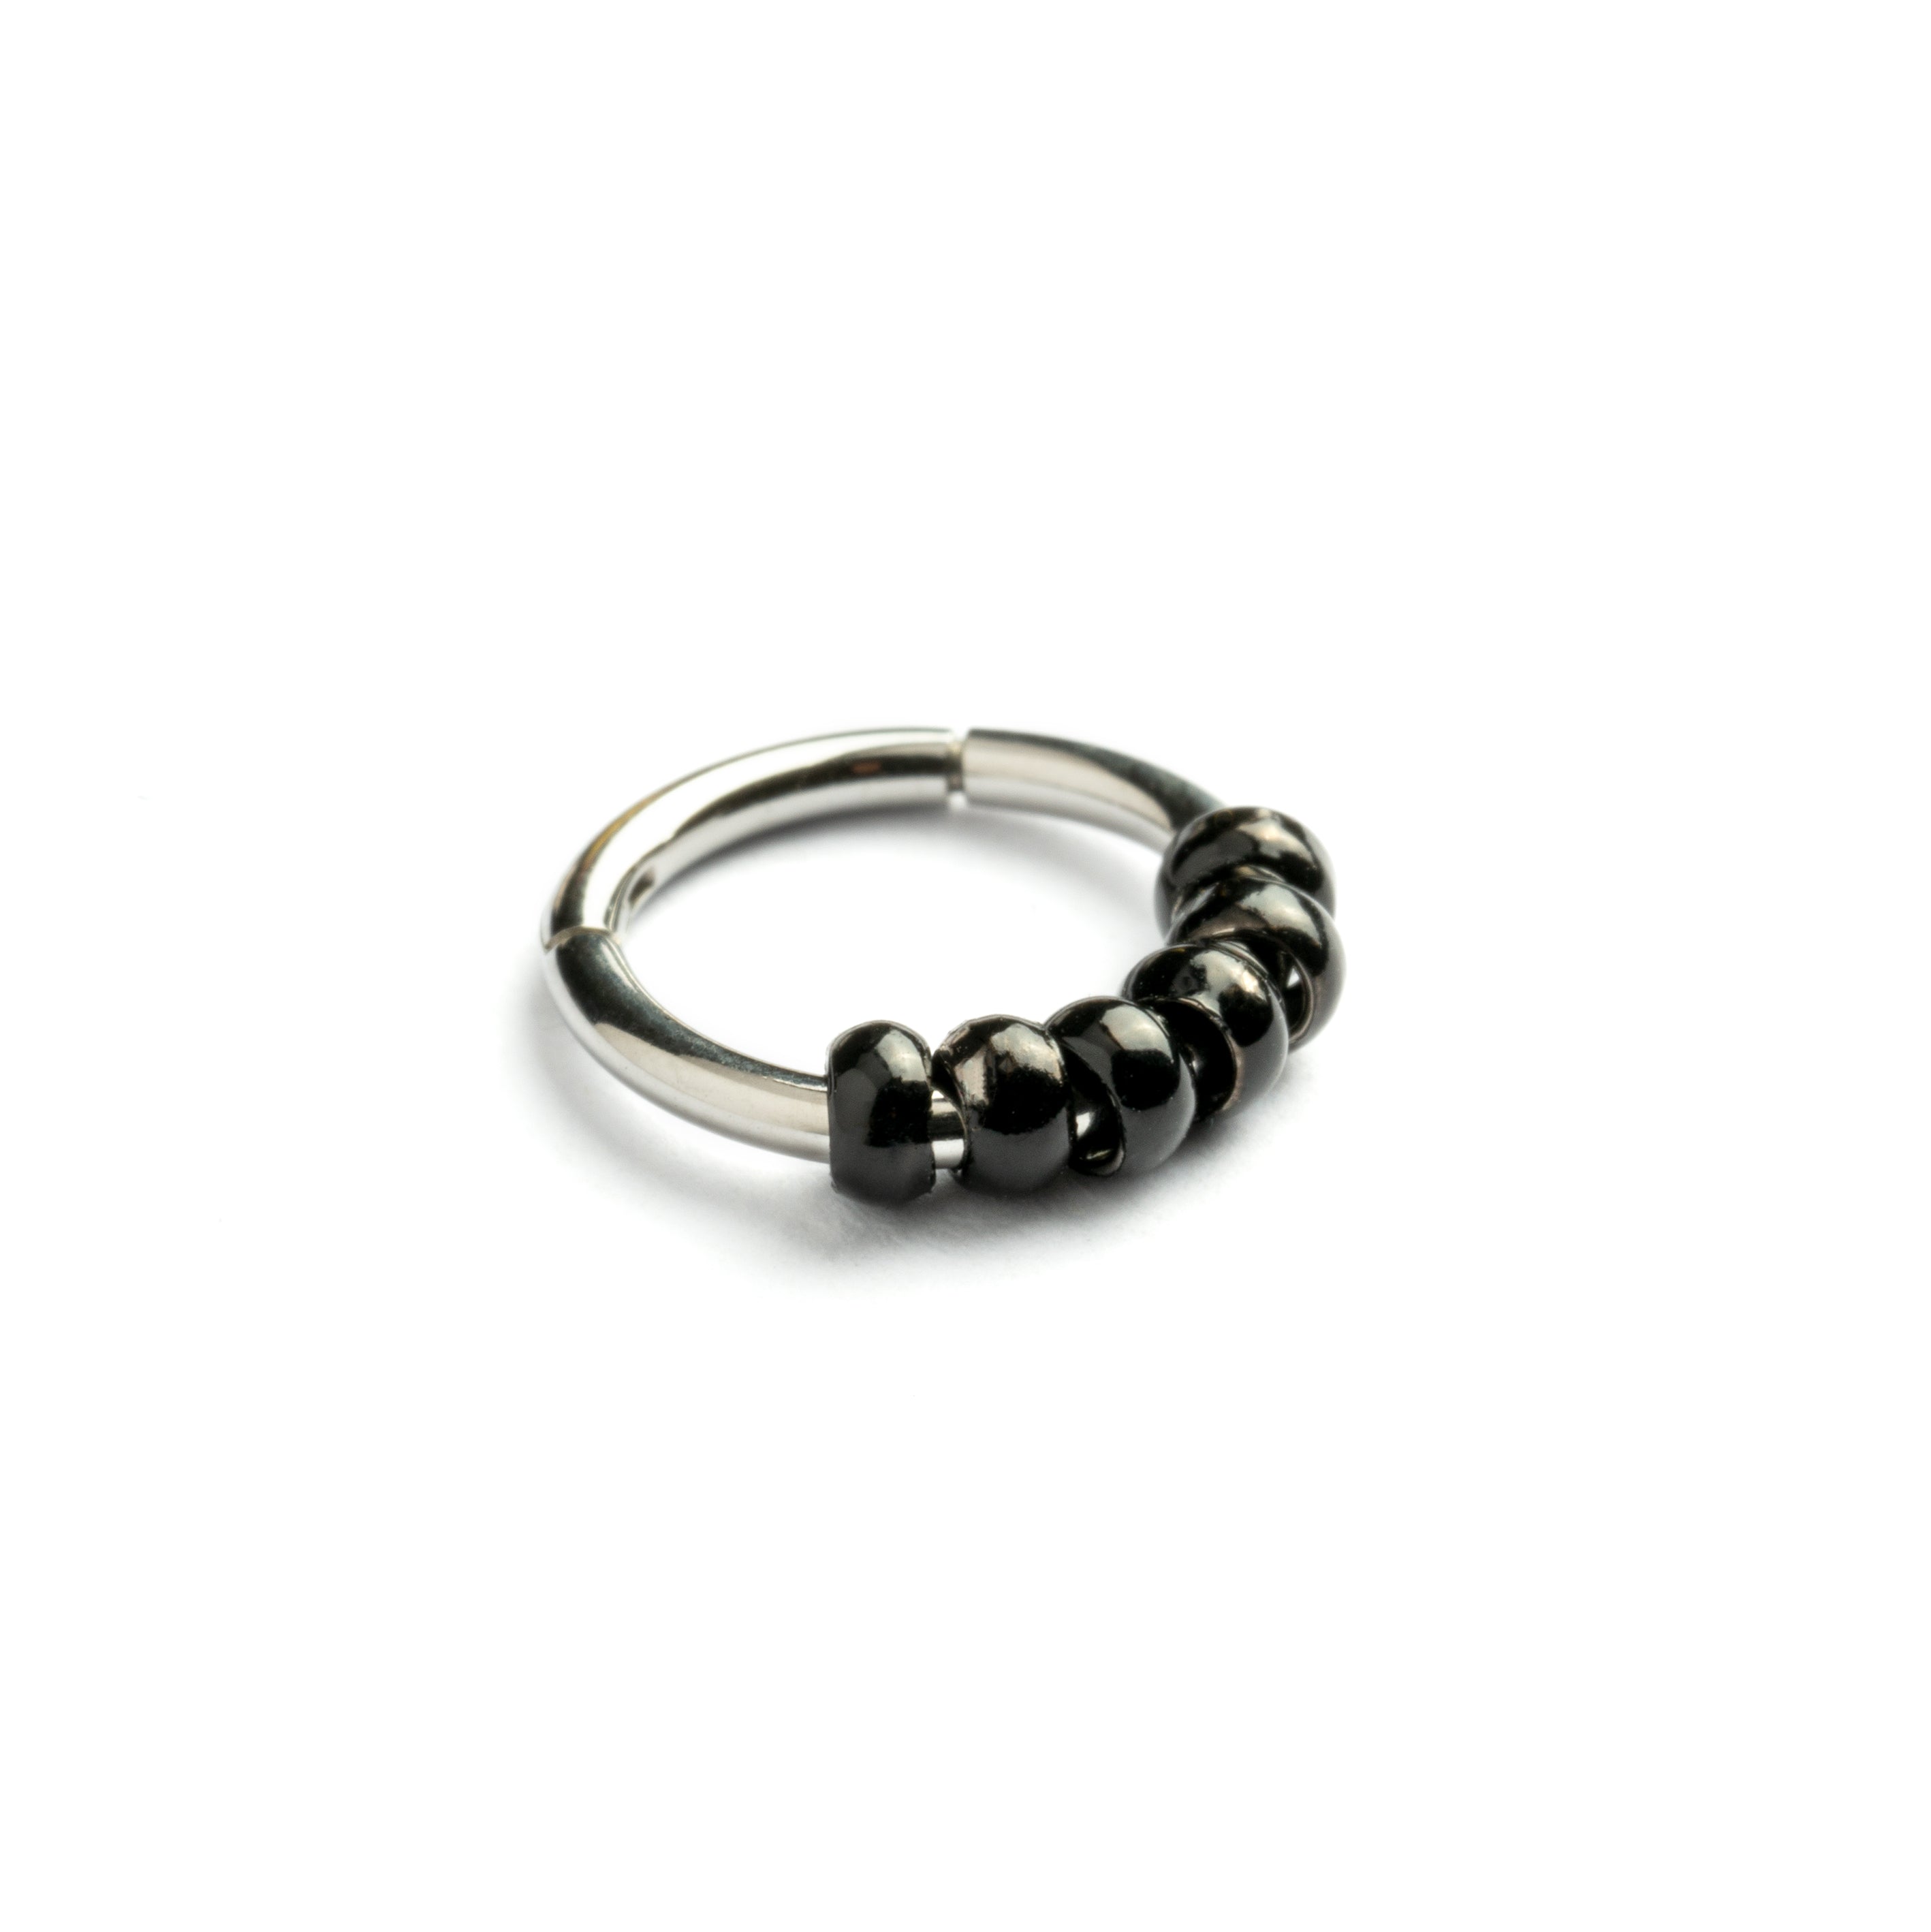 Hinged Segment Ring with Black Beads side view